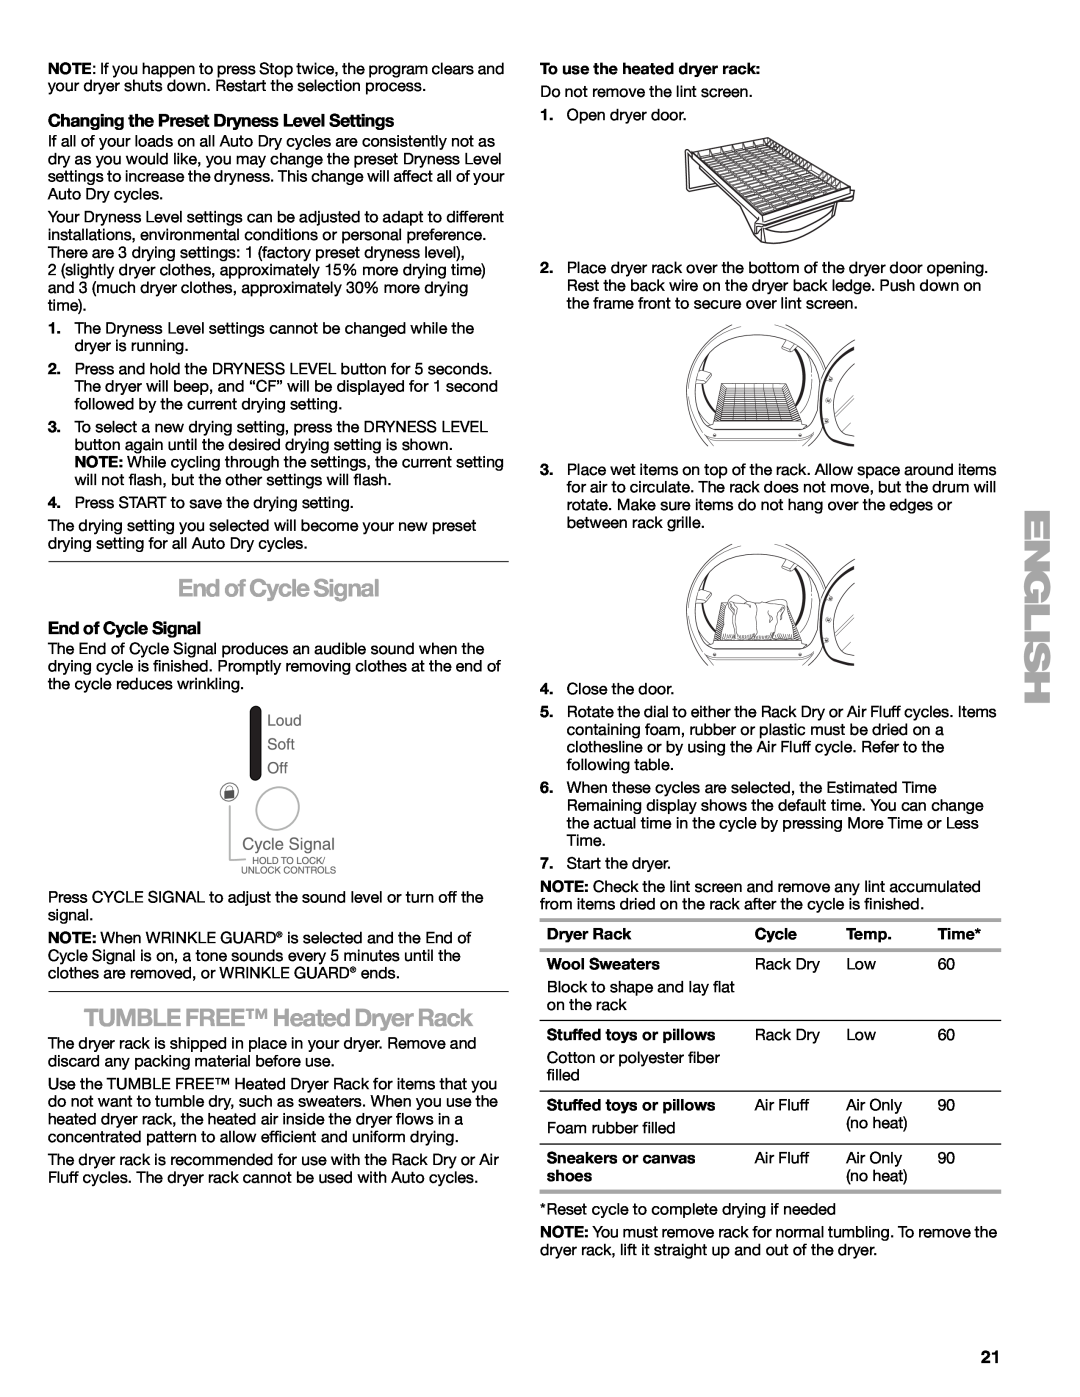 Sears 110.9708, 9709 manual End of Cycle Signal, TUMBLE FREE Heated Dryer Rack, Changing the Preset Dryness Level Settings 